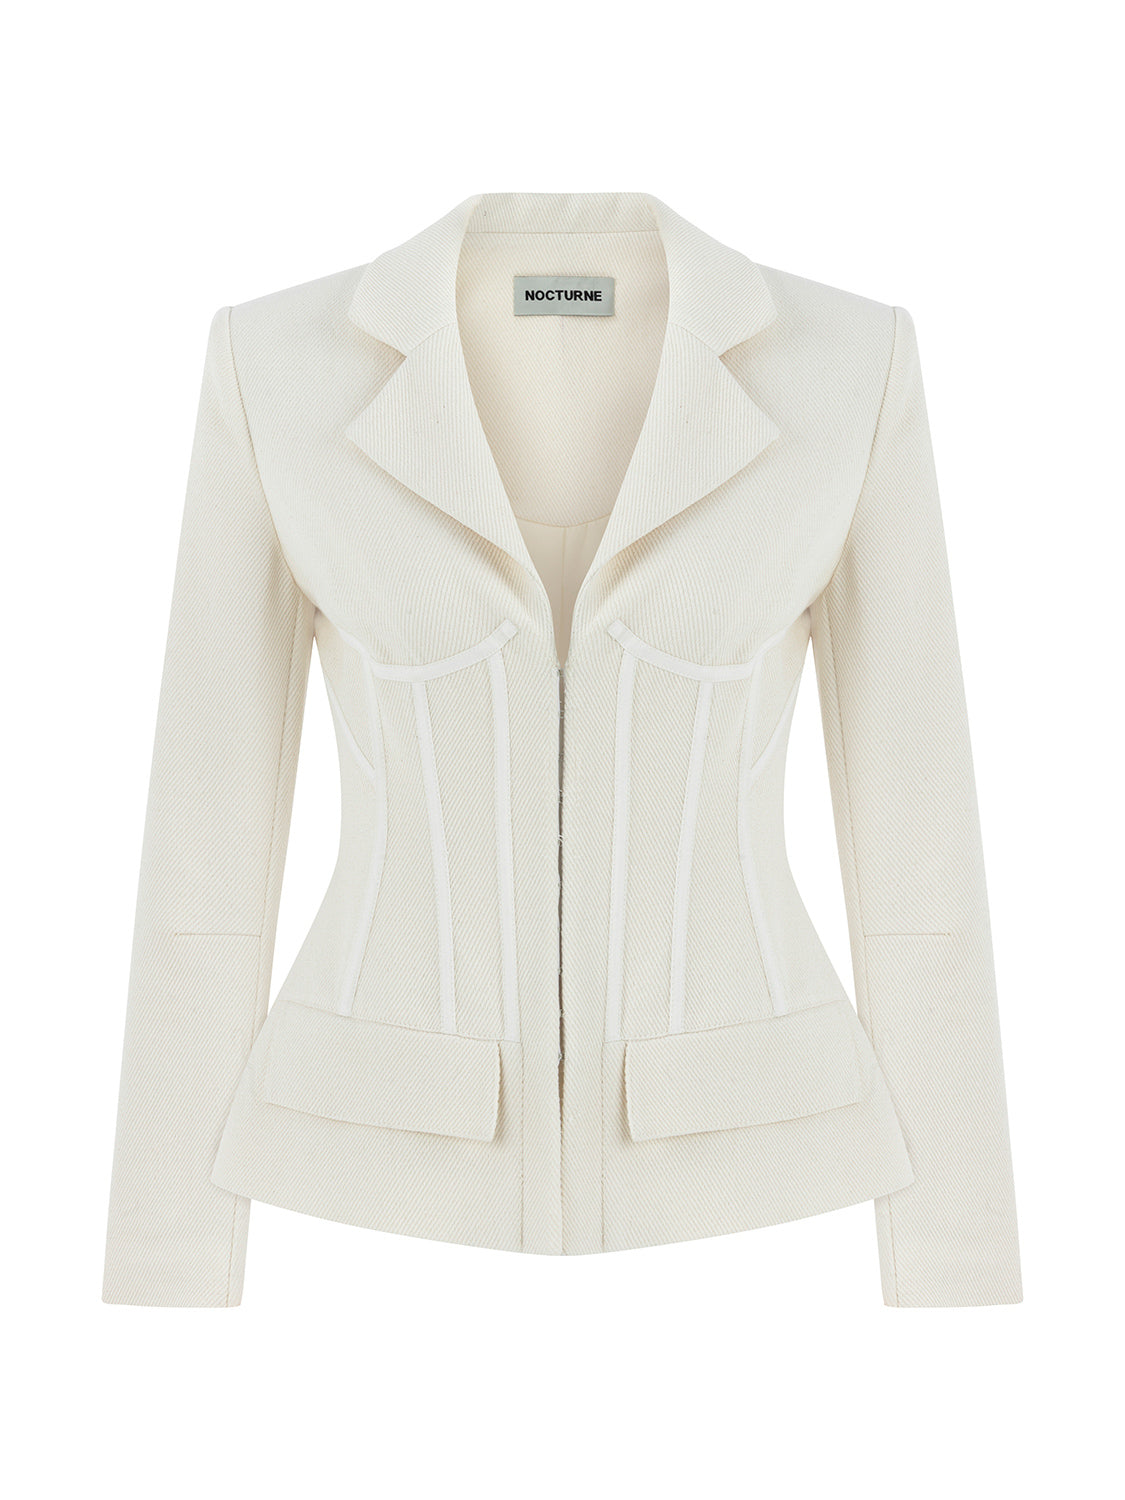 Nocturne Women's White Double-breasted Underwire Detailed Jacket